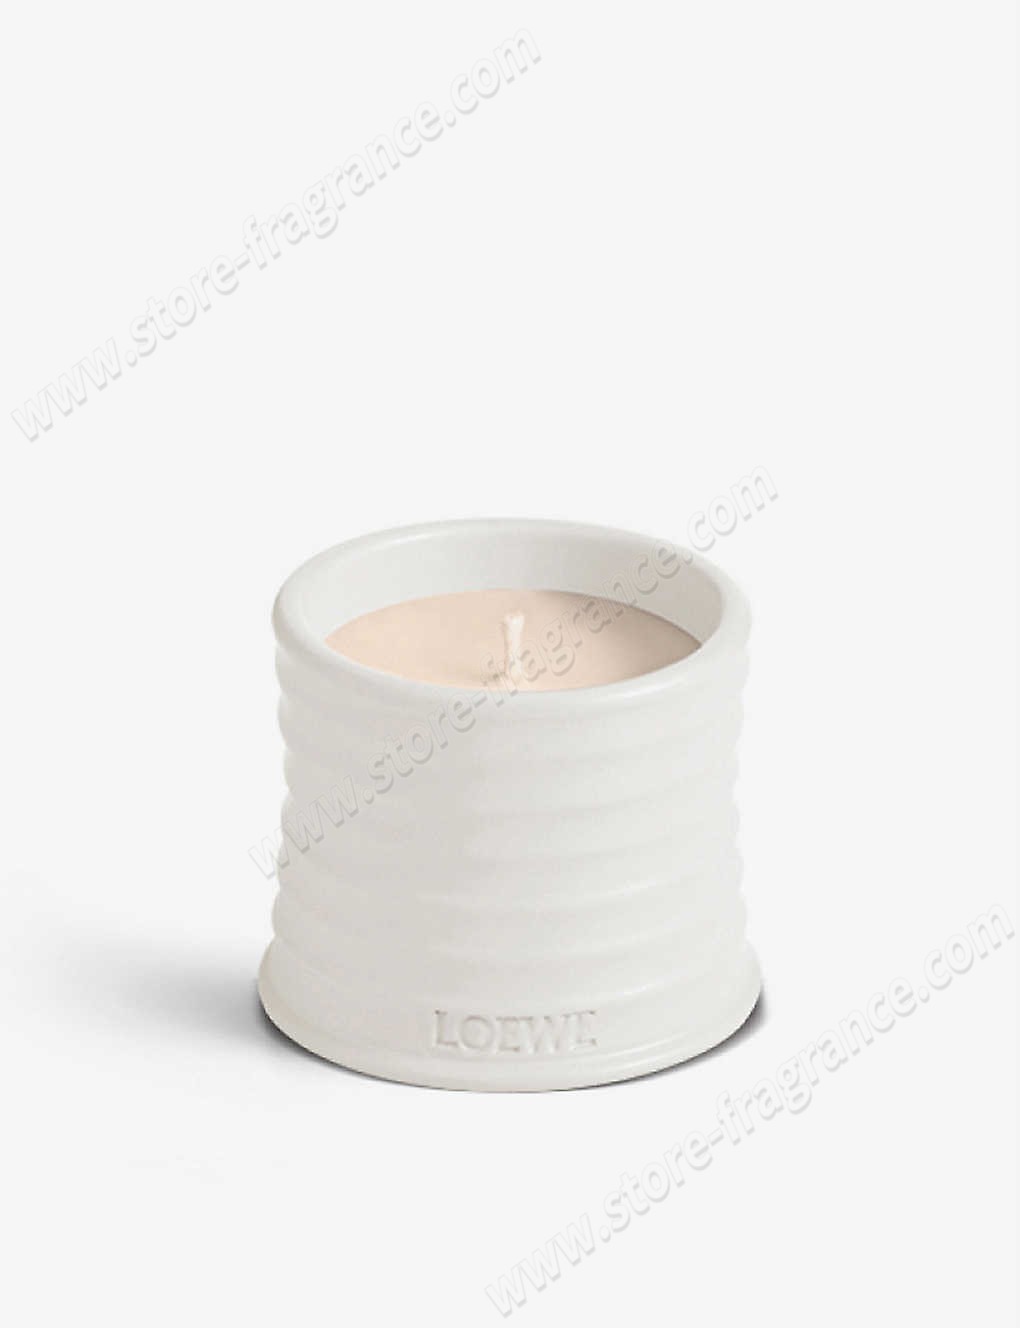 LOEWE/Oregano scented candle 170g ✿ Discount Store - -0